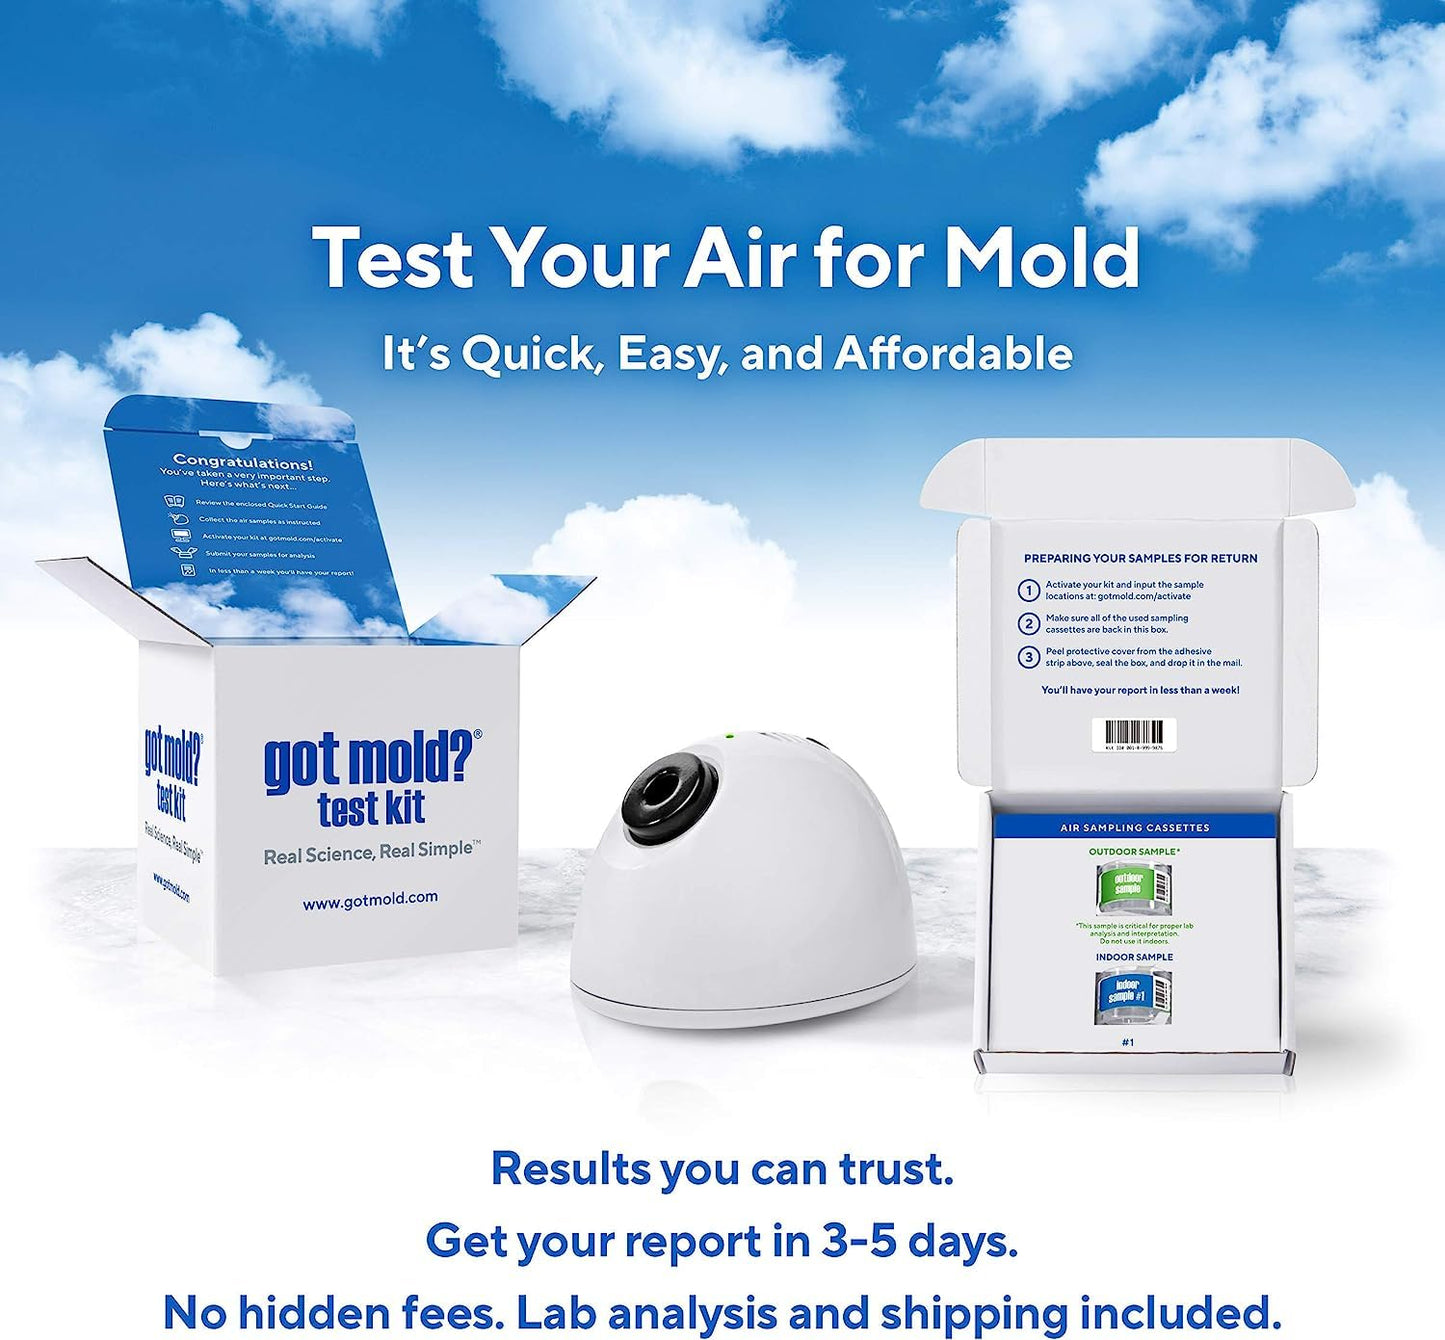 GOT MOLD? Test Kit | Professional Quality Mold Test Kit | Air Sampling w/Reusable BioVac™ Air Sampler | Lab Fees Included | Full Mold Type and Quantity Analysis | 1, 2 and 3-Room Test Kits & Refills